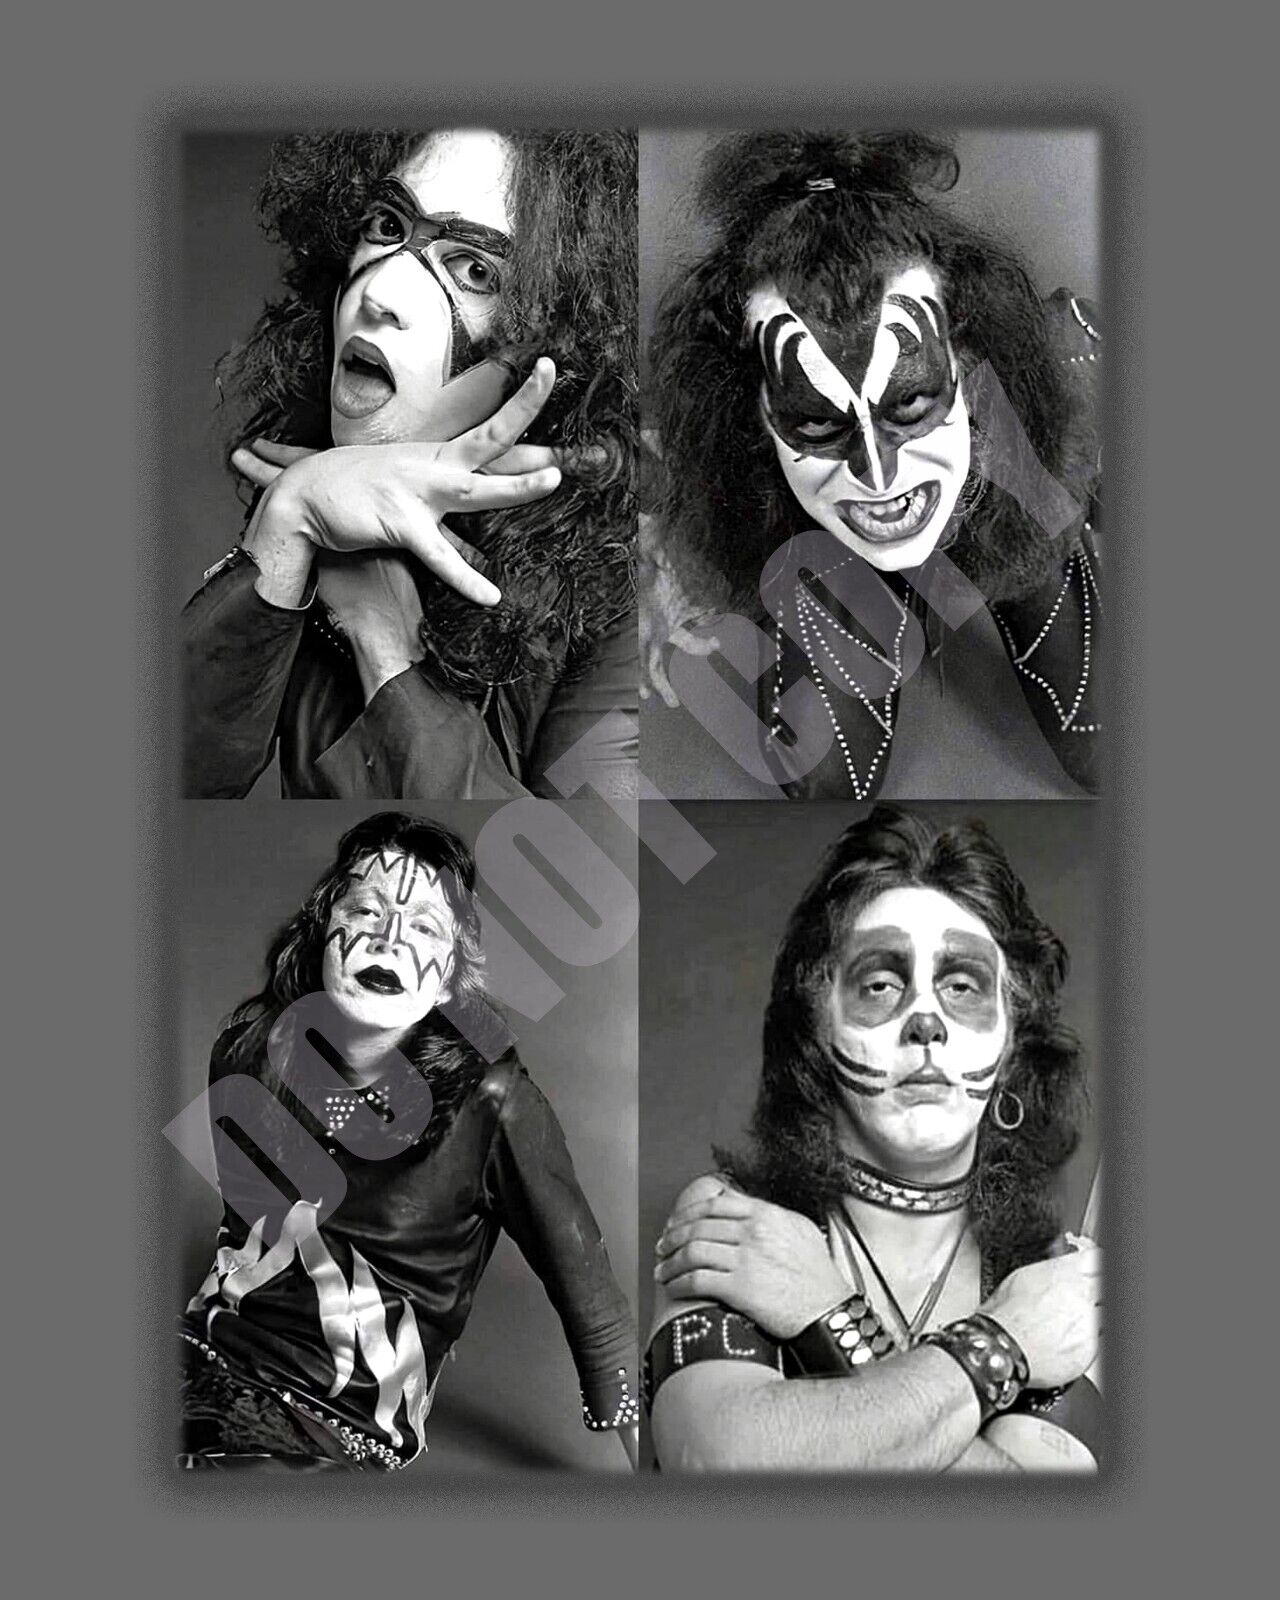 1974 KISS Gene Simmons Paul Stanley Ace Frehley Peter Criss Collage 8x10 Photo